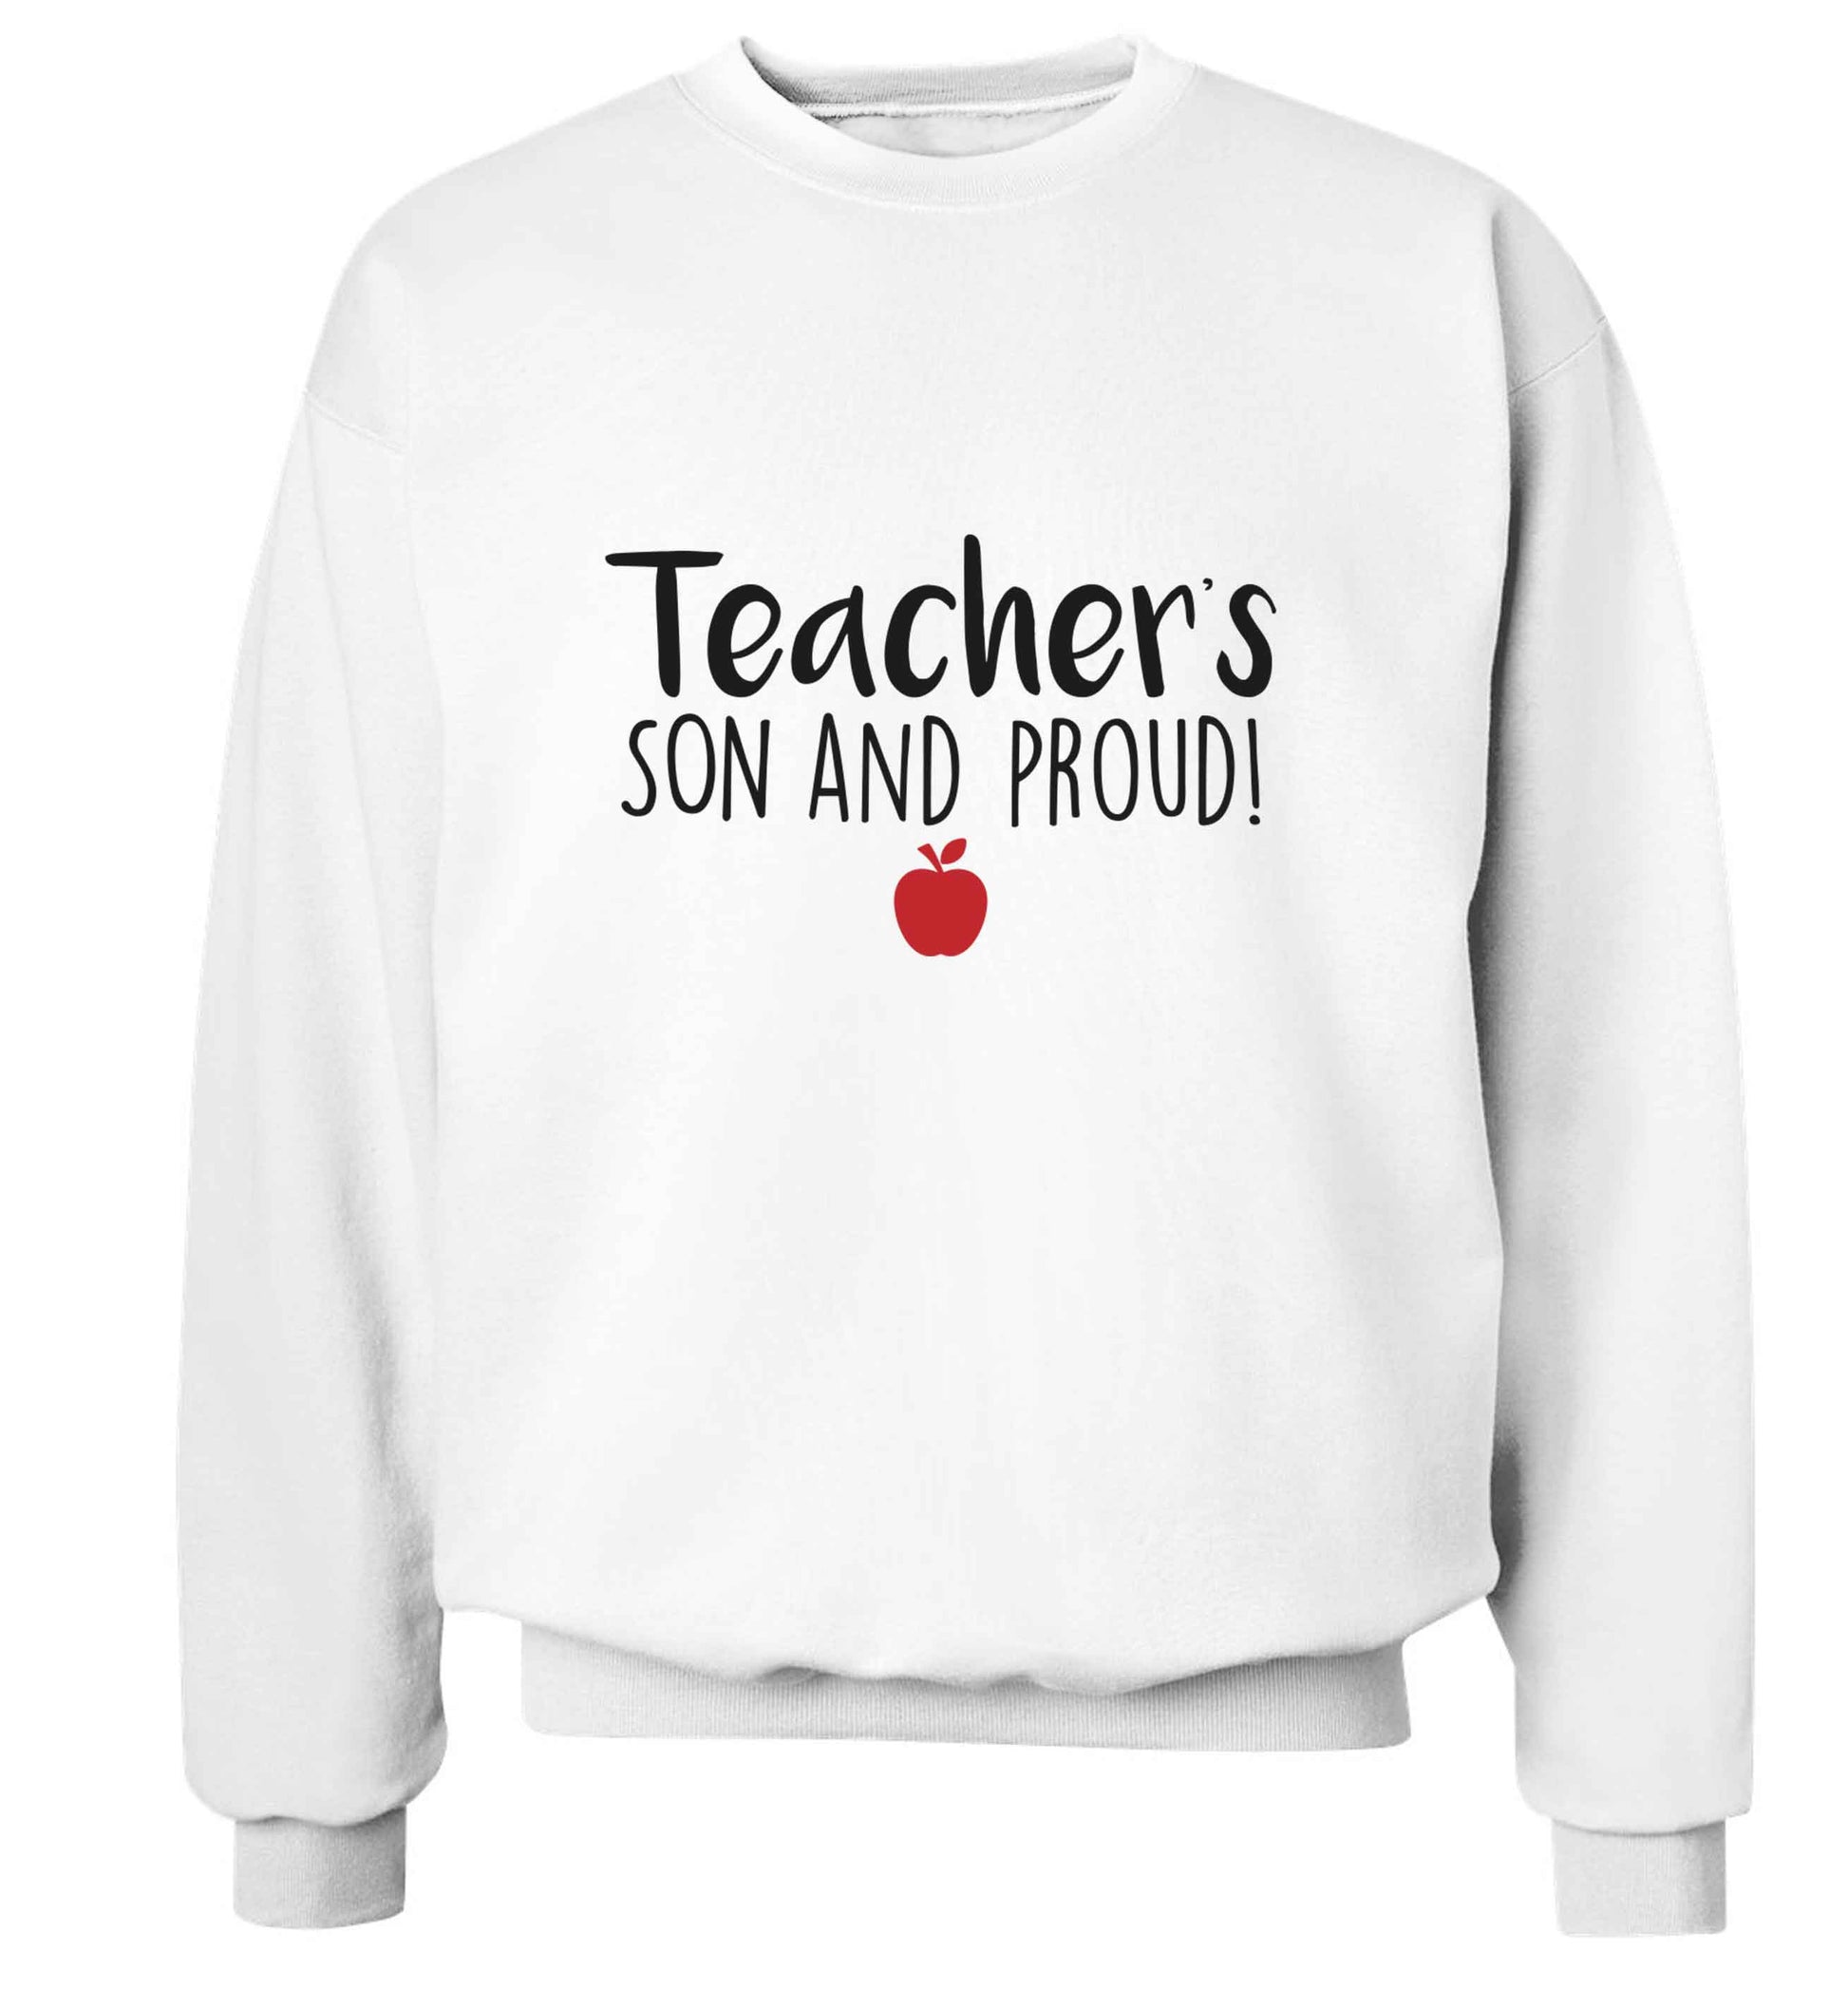 Teachers son and proud adult's unisex white sweater 2XL